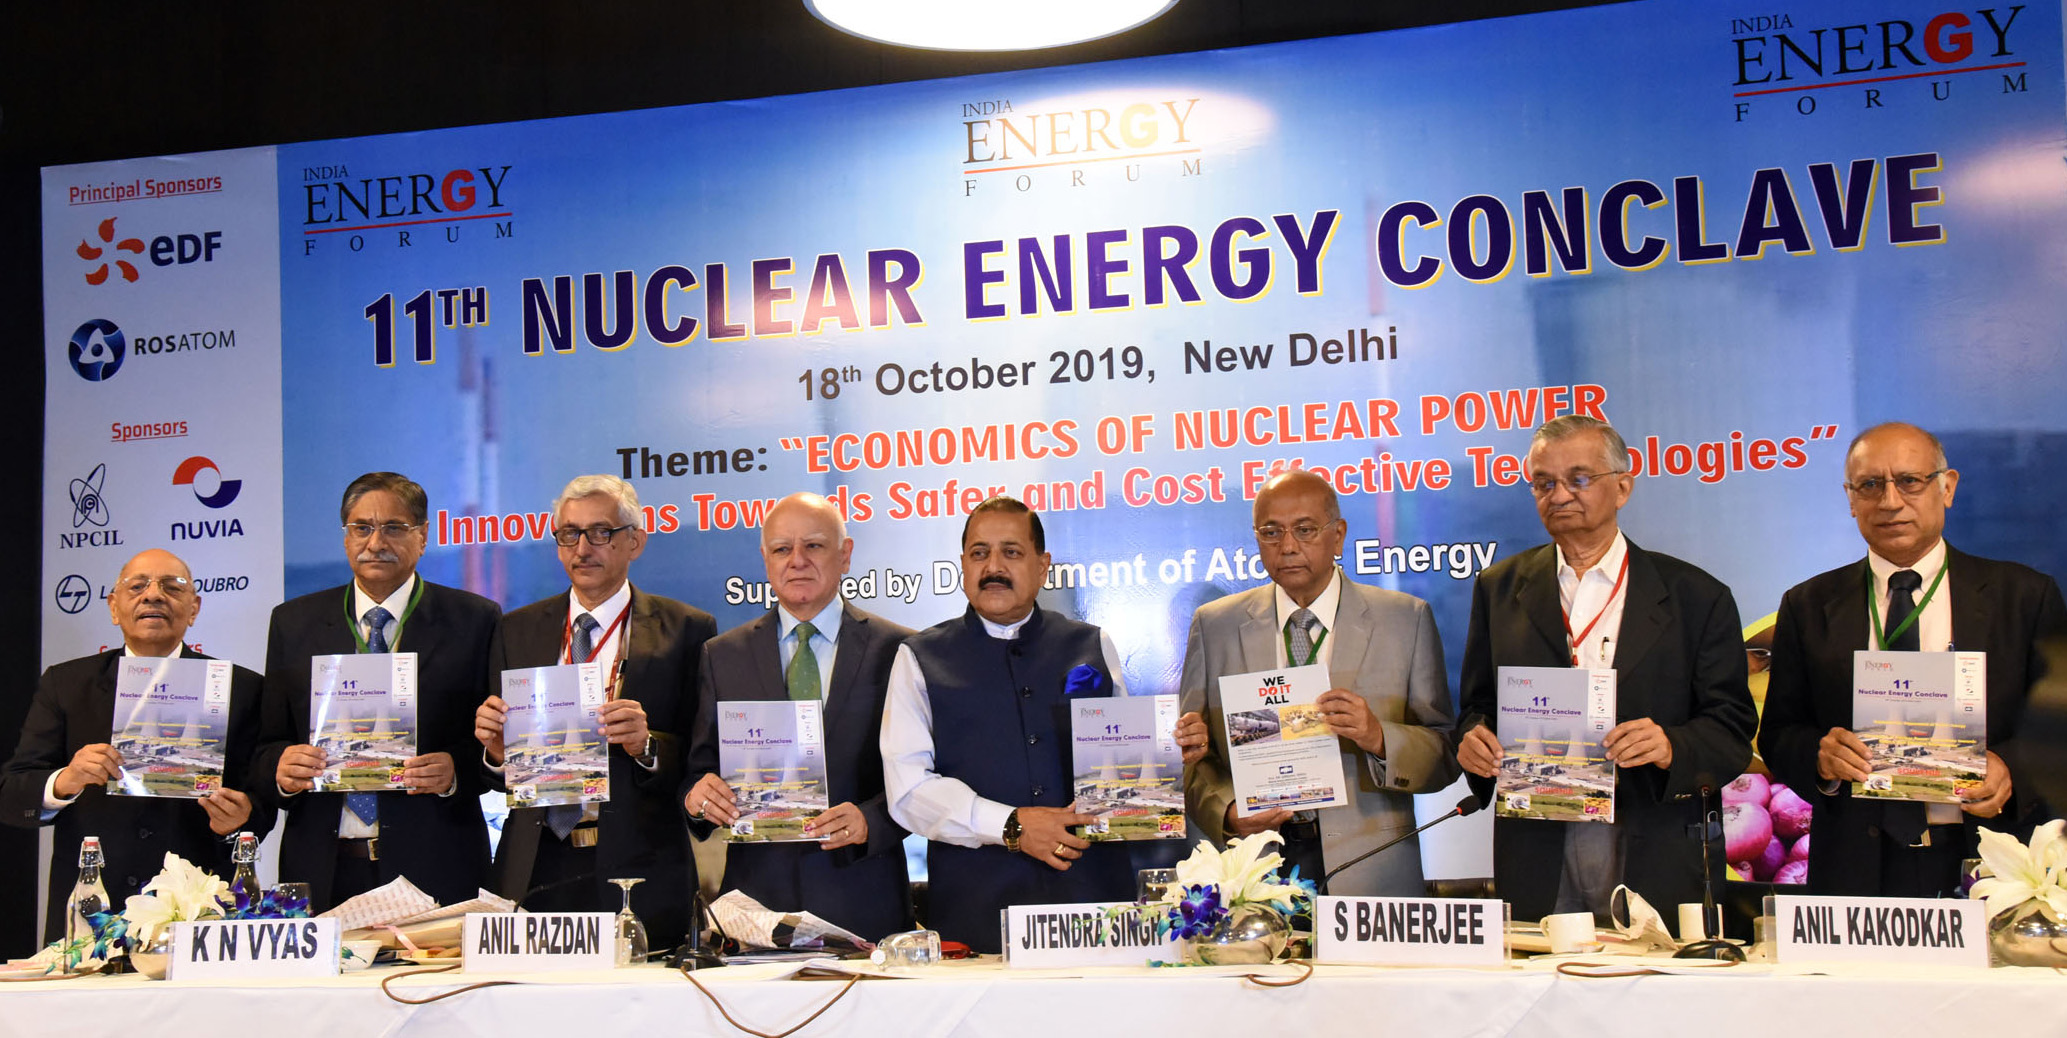 The Minister of State for Development of North Eastern Region (I/C), Prime Ministers Office, Personnel, Public Grievances & Pensions, Atomic Energy and Space, Dr. Jitendra Singh releasing the publication, at the inauguration of the 11th Nuclear Energy Conclave, in New Delhi on October 18, 2019. The Chairman, Department of Atomic Energy (DAE), Shri K.N. Vyas and other dignitaries are also seen.